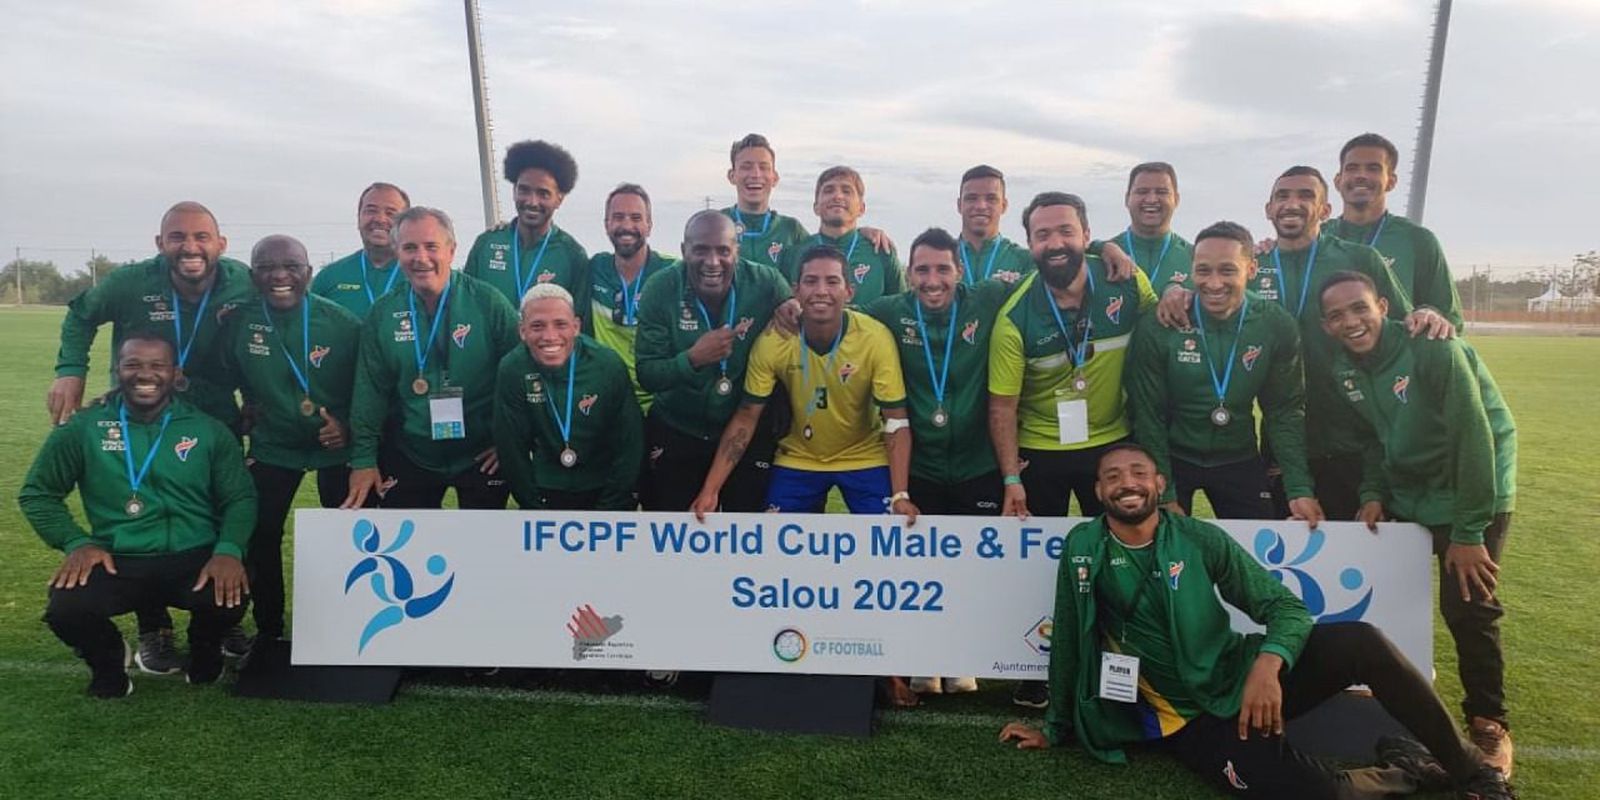 Brazil secures bronze at the World Cup for cerebral palsy